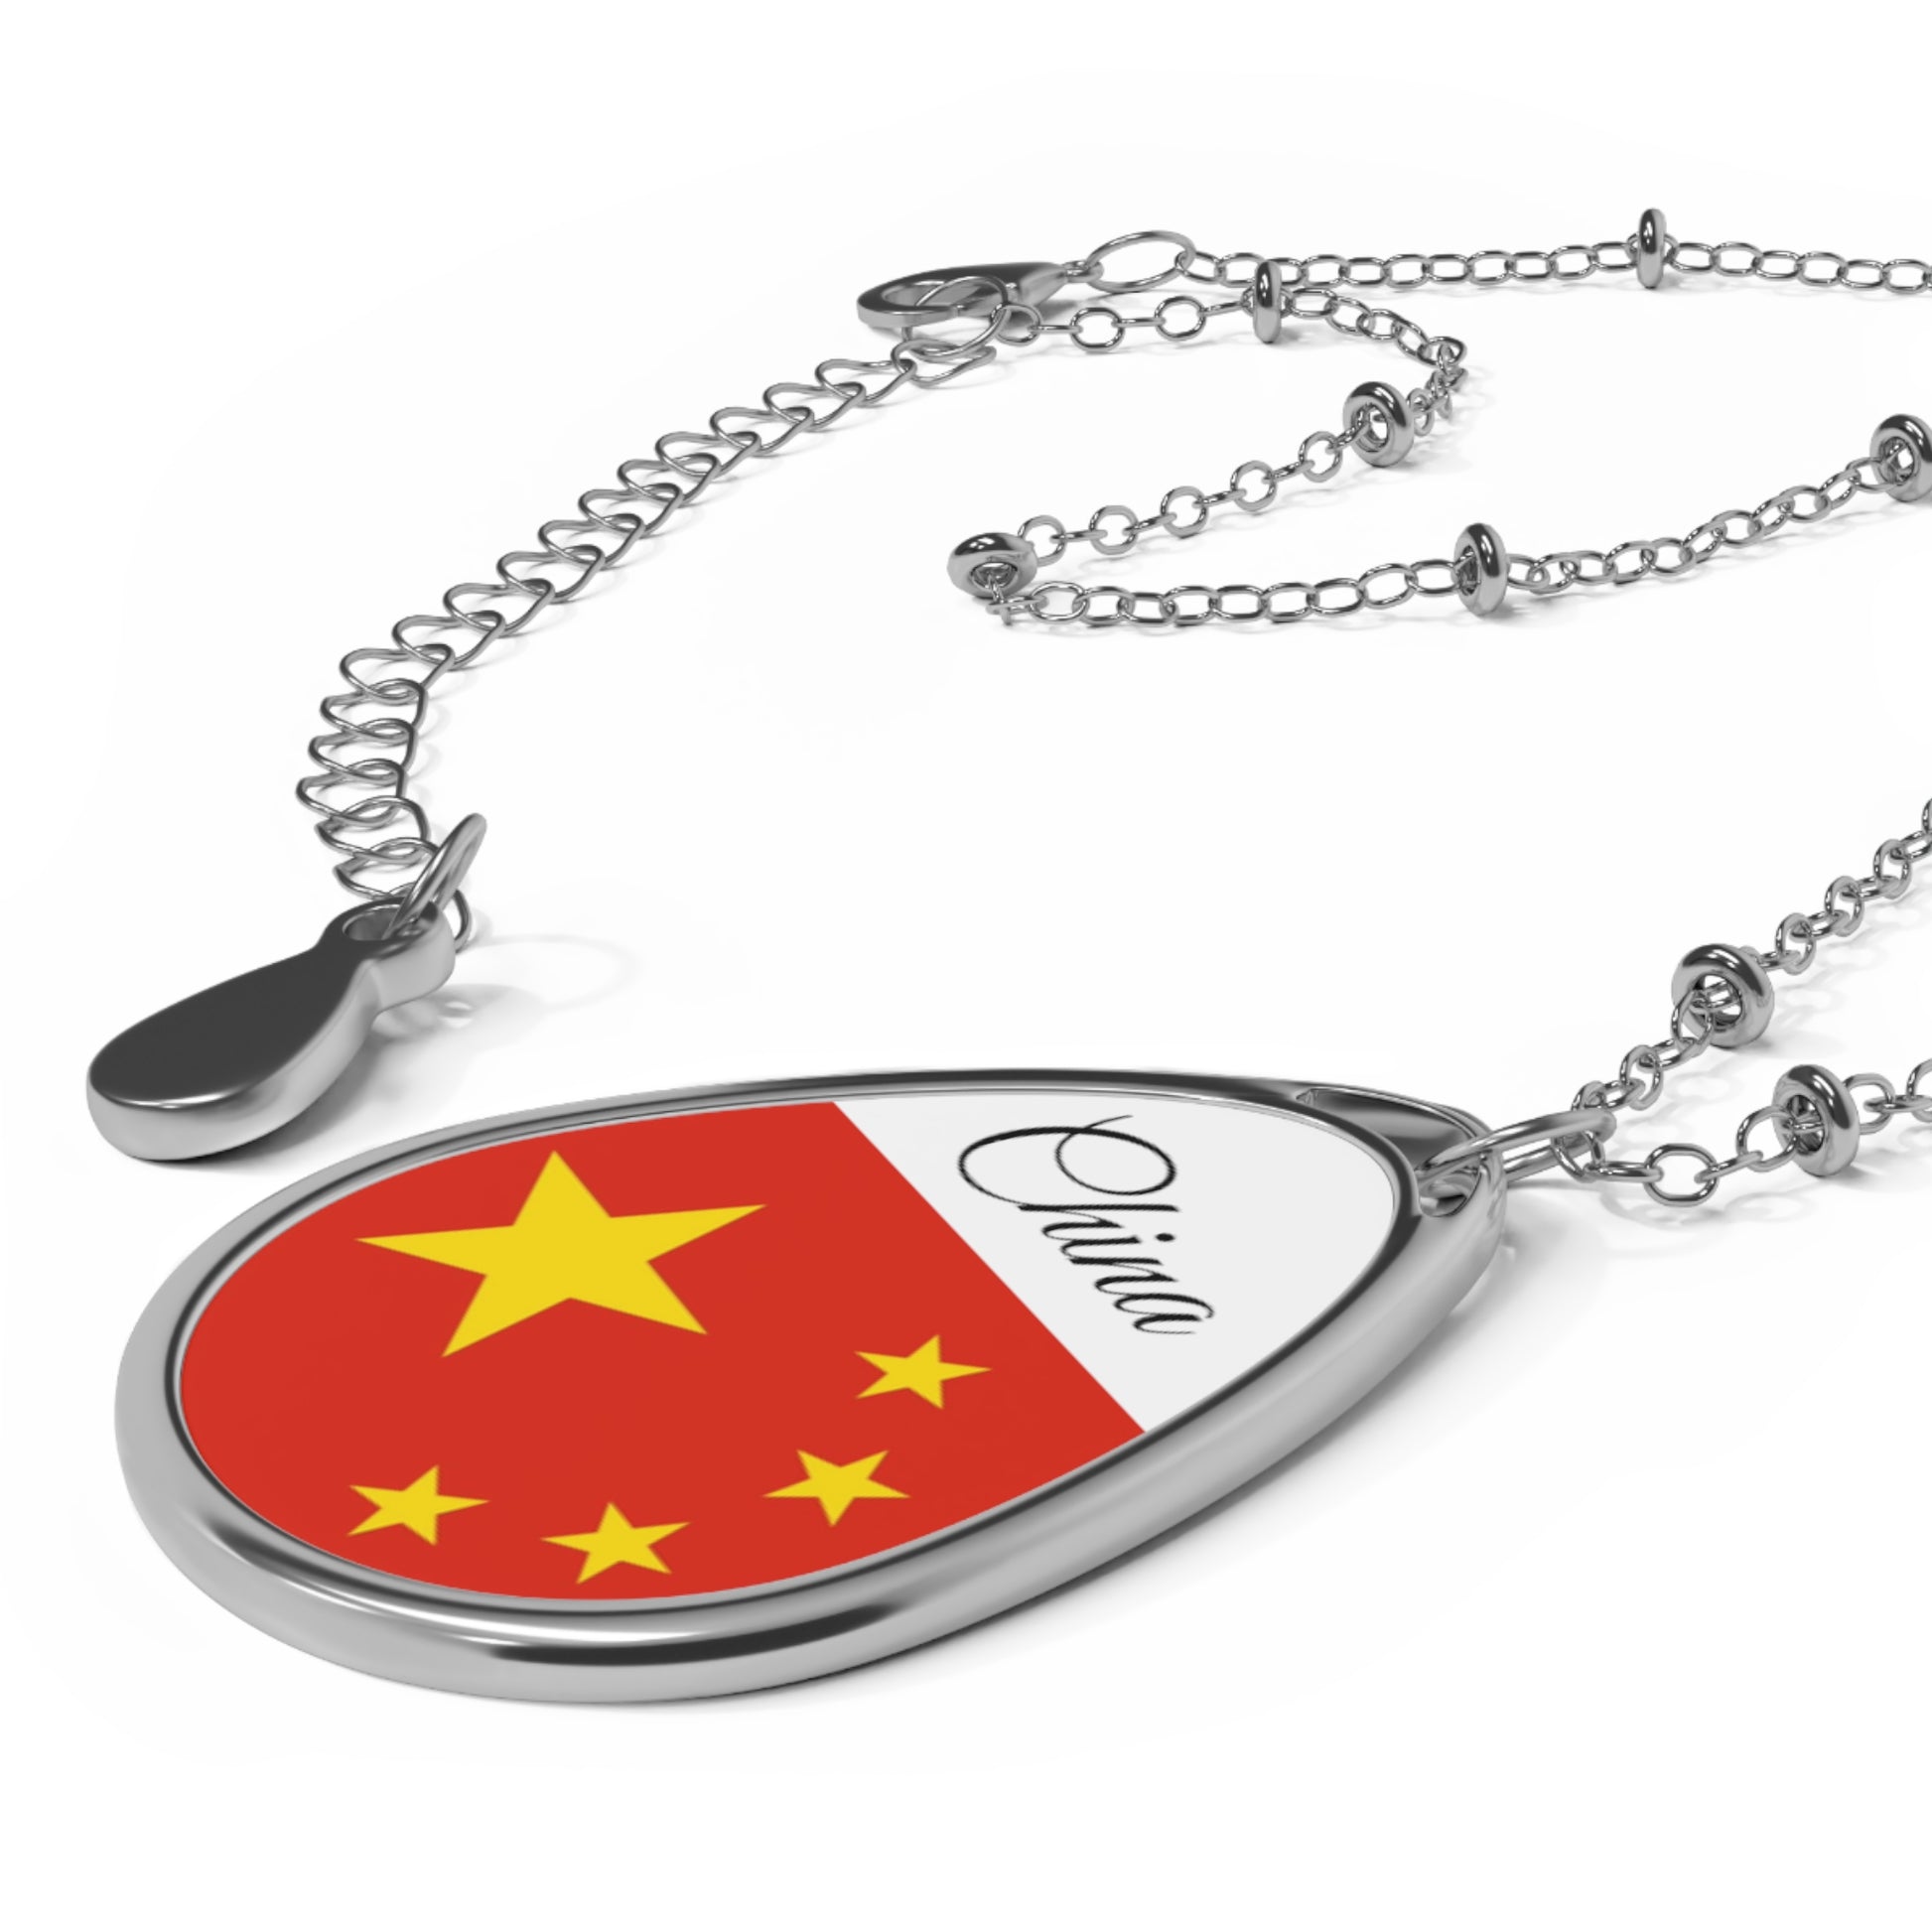 Patriotic Jewelry For China Lovers